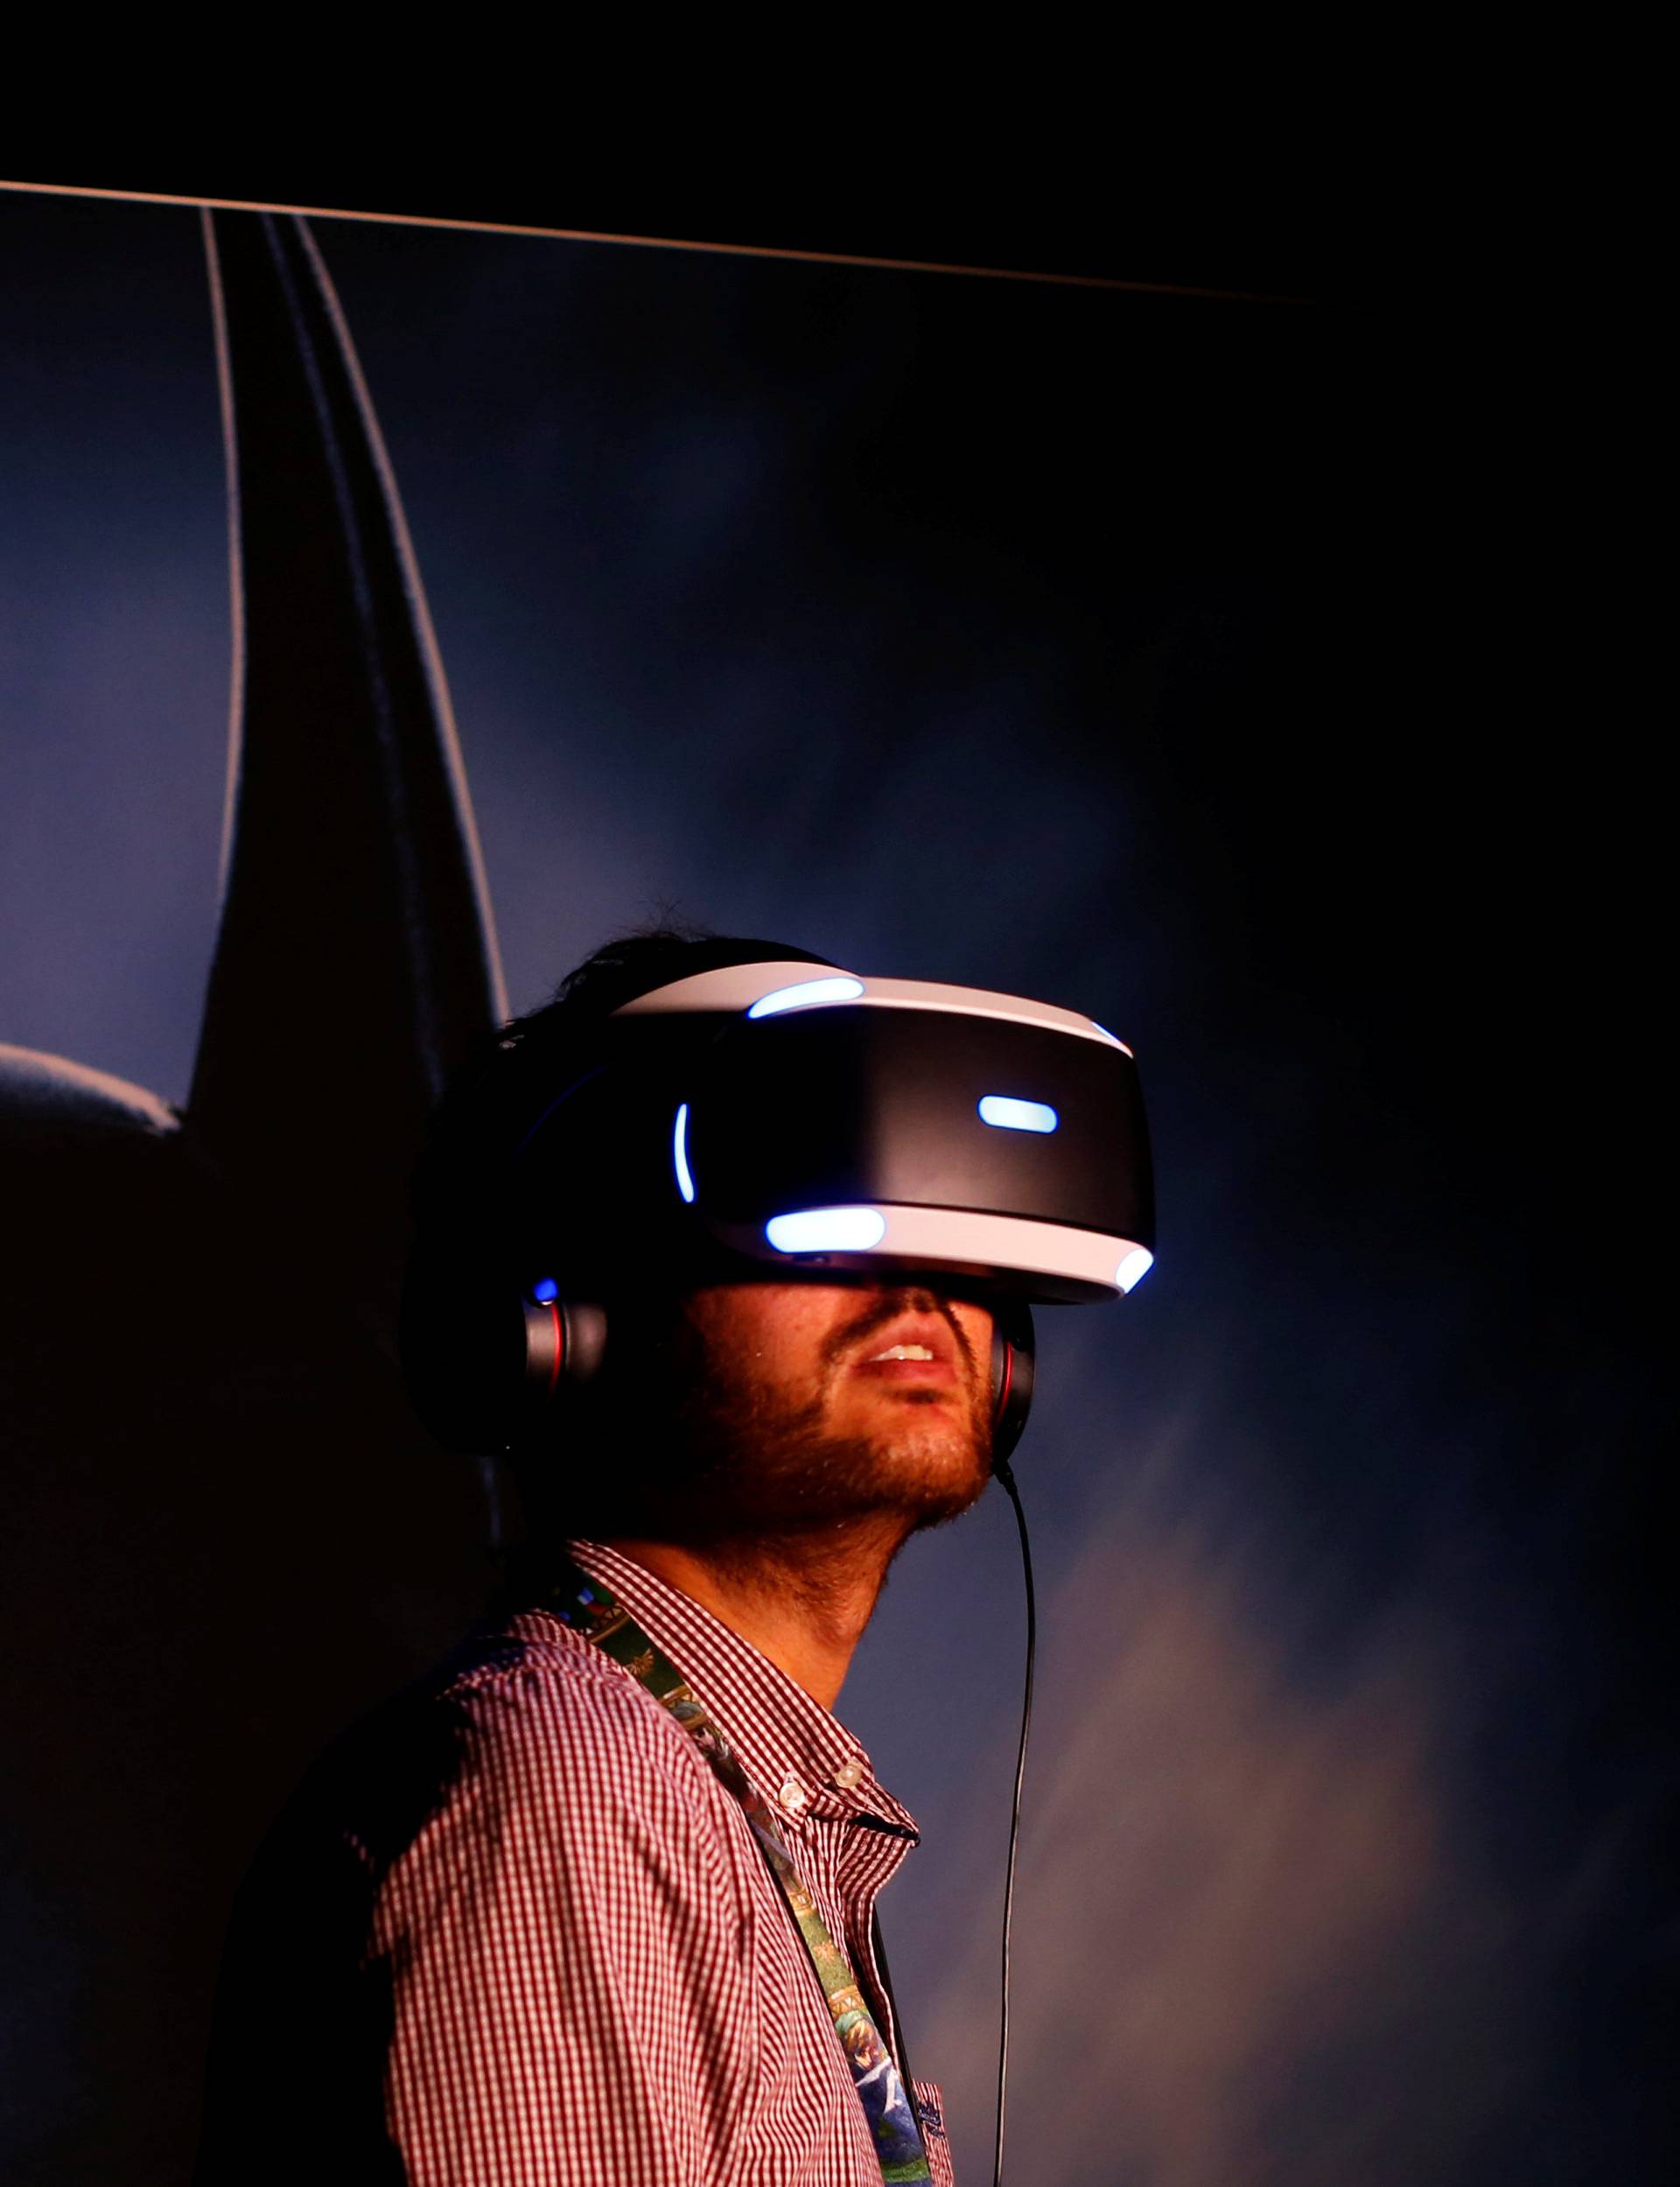 People try the new Sony VR headset during Sony Corporation's PlayStation 4 E3 2016 event in Los Angeles